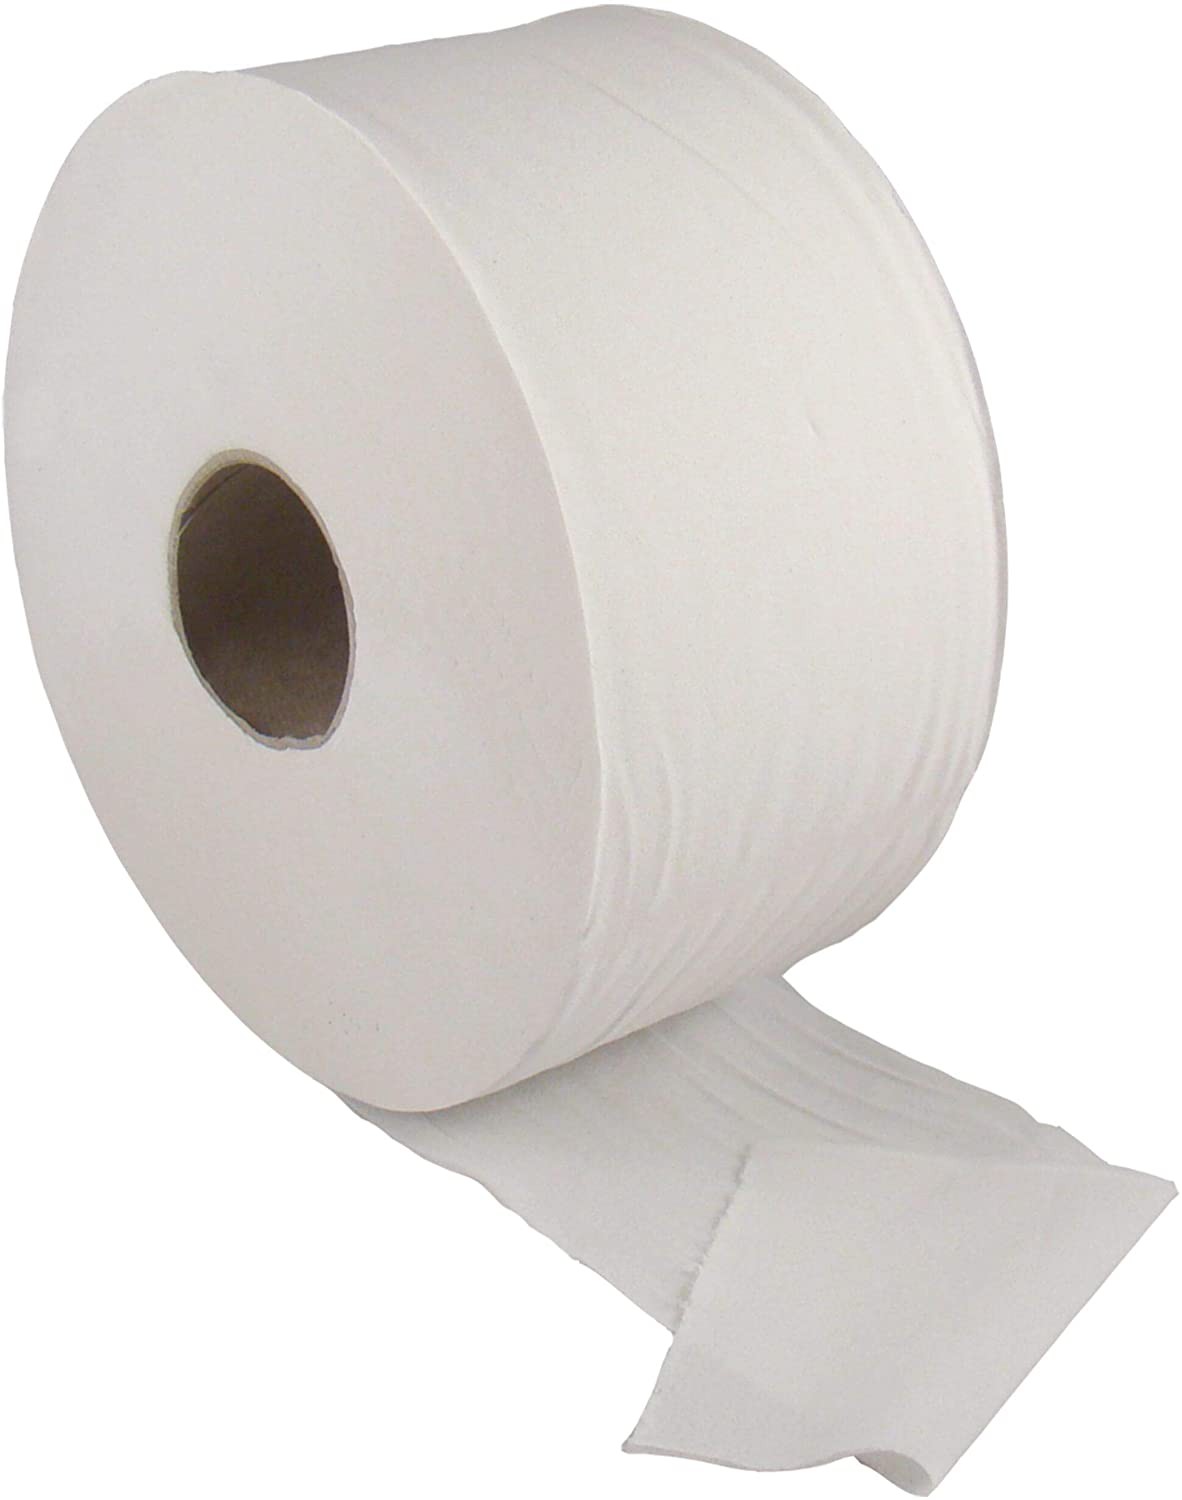 Paperstation+2+Ply+Mini+Jumbo+Toilet+Roll+%5Cr%5Cn150M+x+86mm+x+80mm+416+Sheets+Pack+12